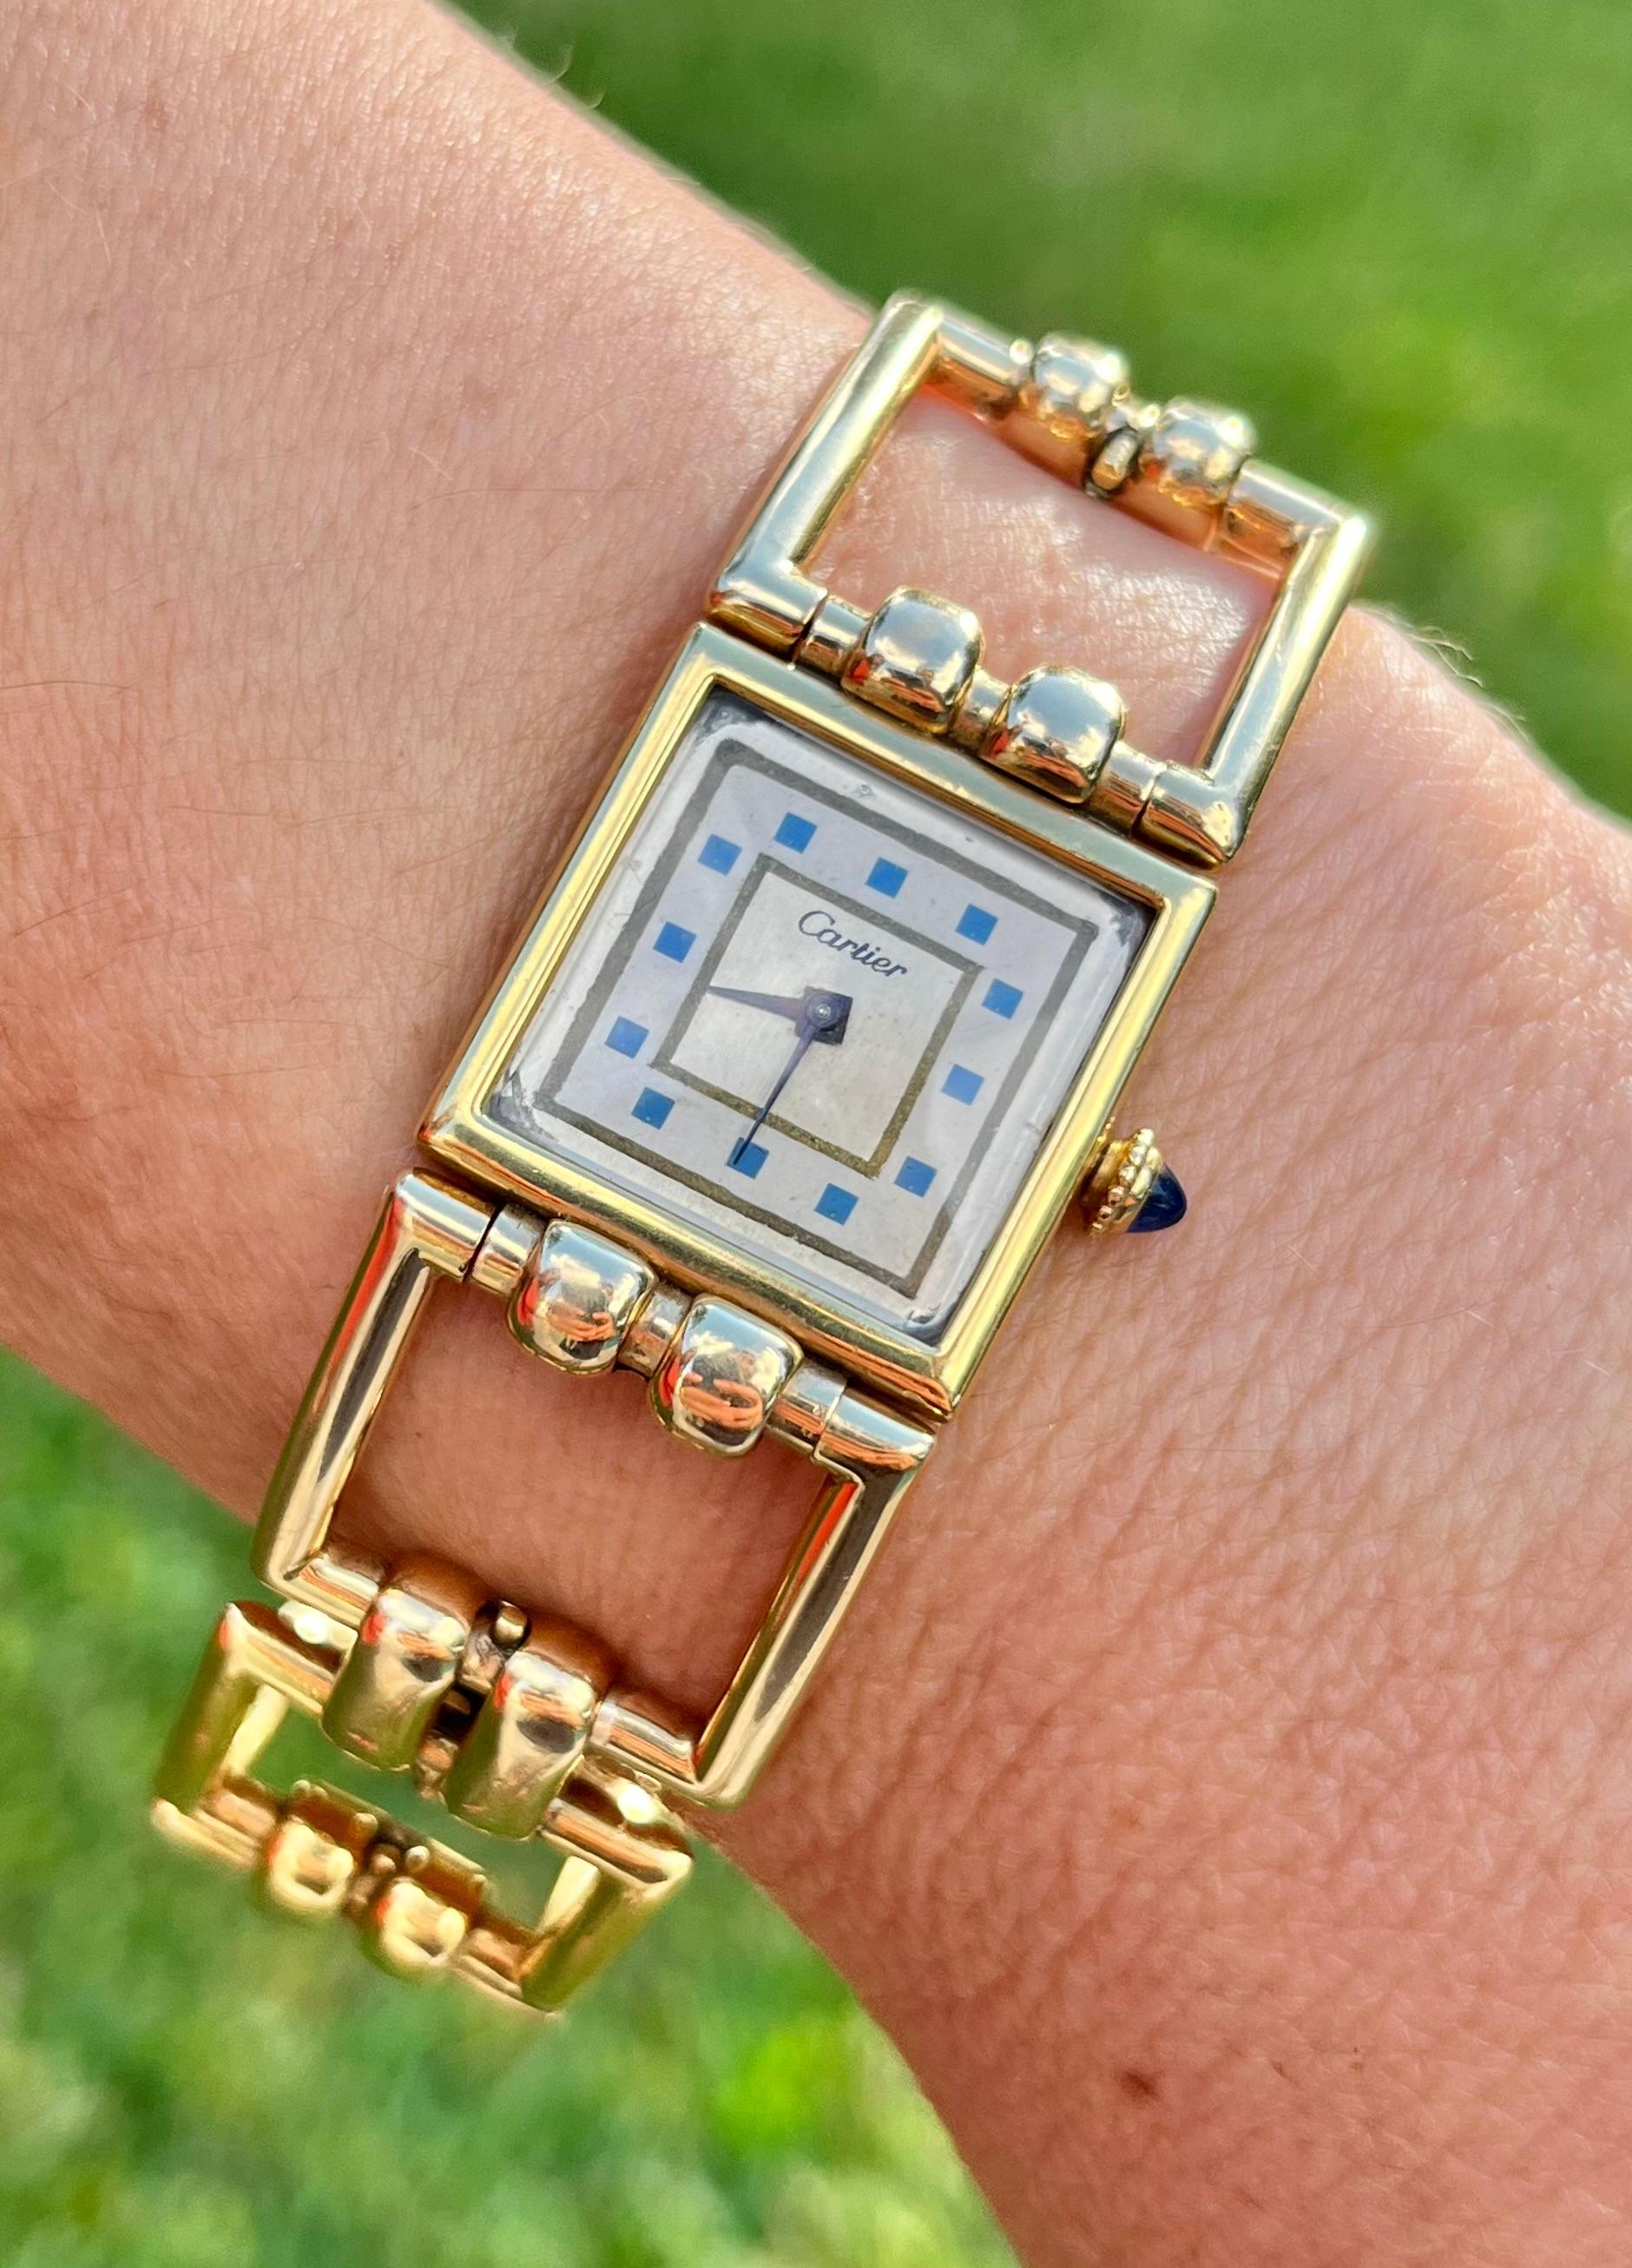 Cartier signed original ladies wristwatch. Vintage, circa 1960. This timepiece has a unique 14k gold square link bracelet that seamlessly wraps around the wrist. The movement is still in perfect working condition (manual wind). It's a gorgeous art